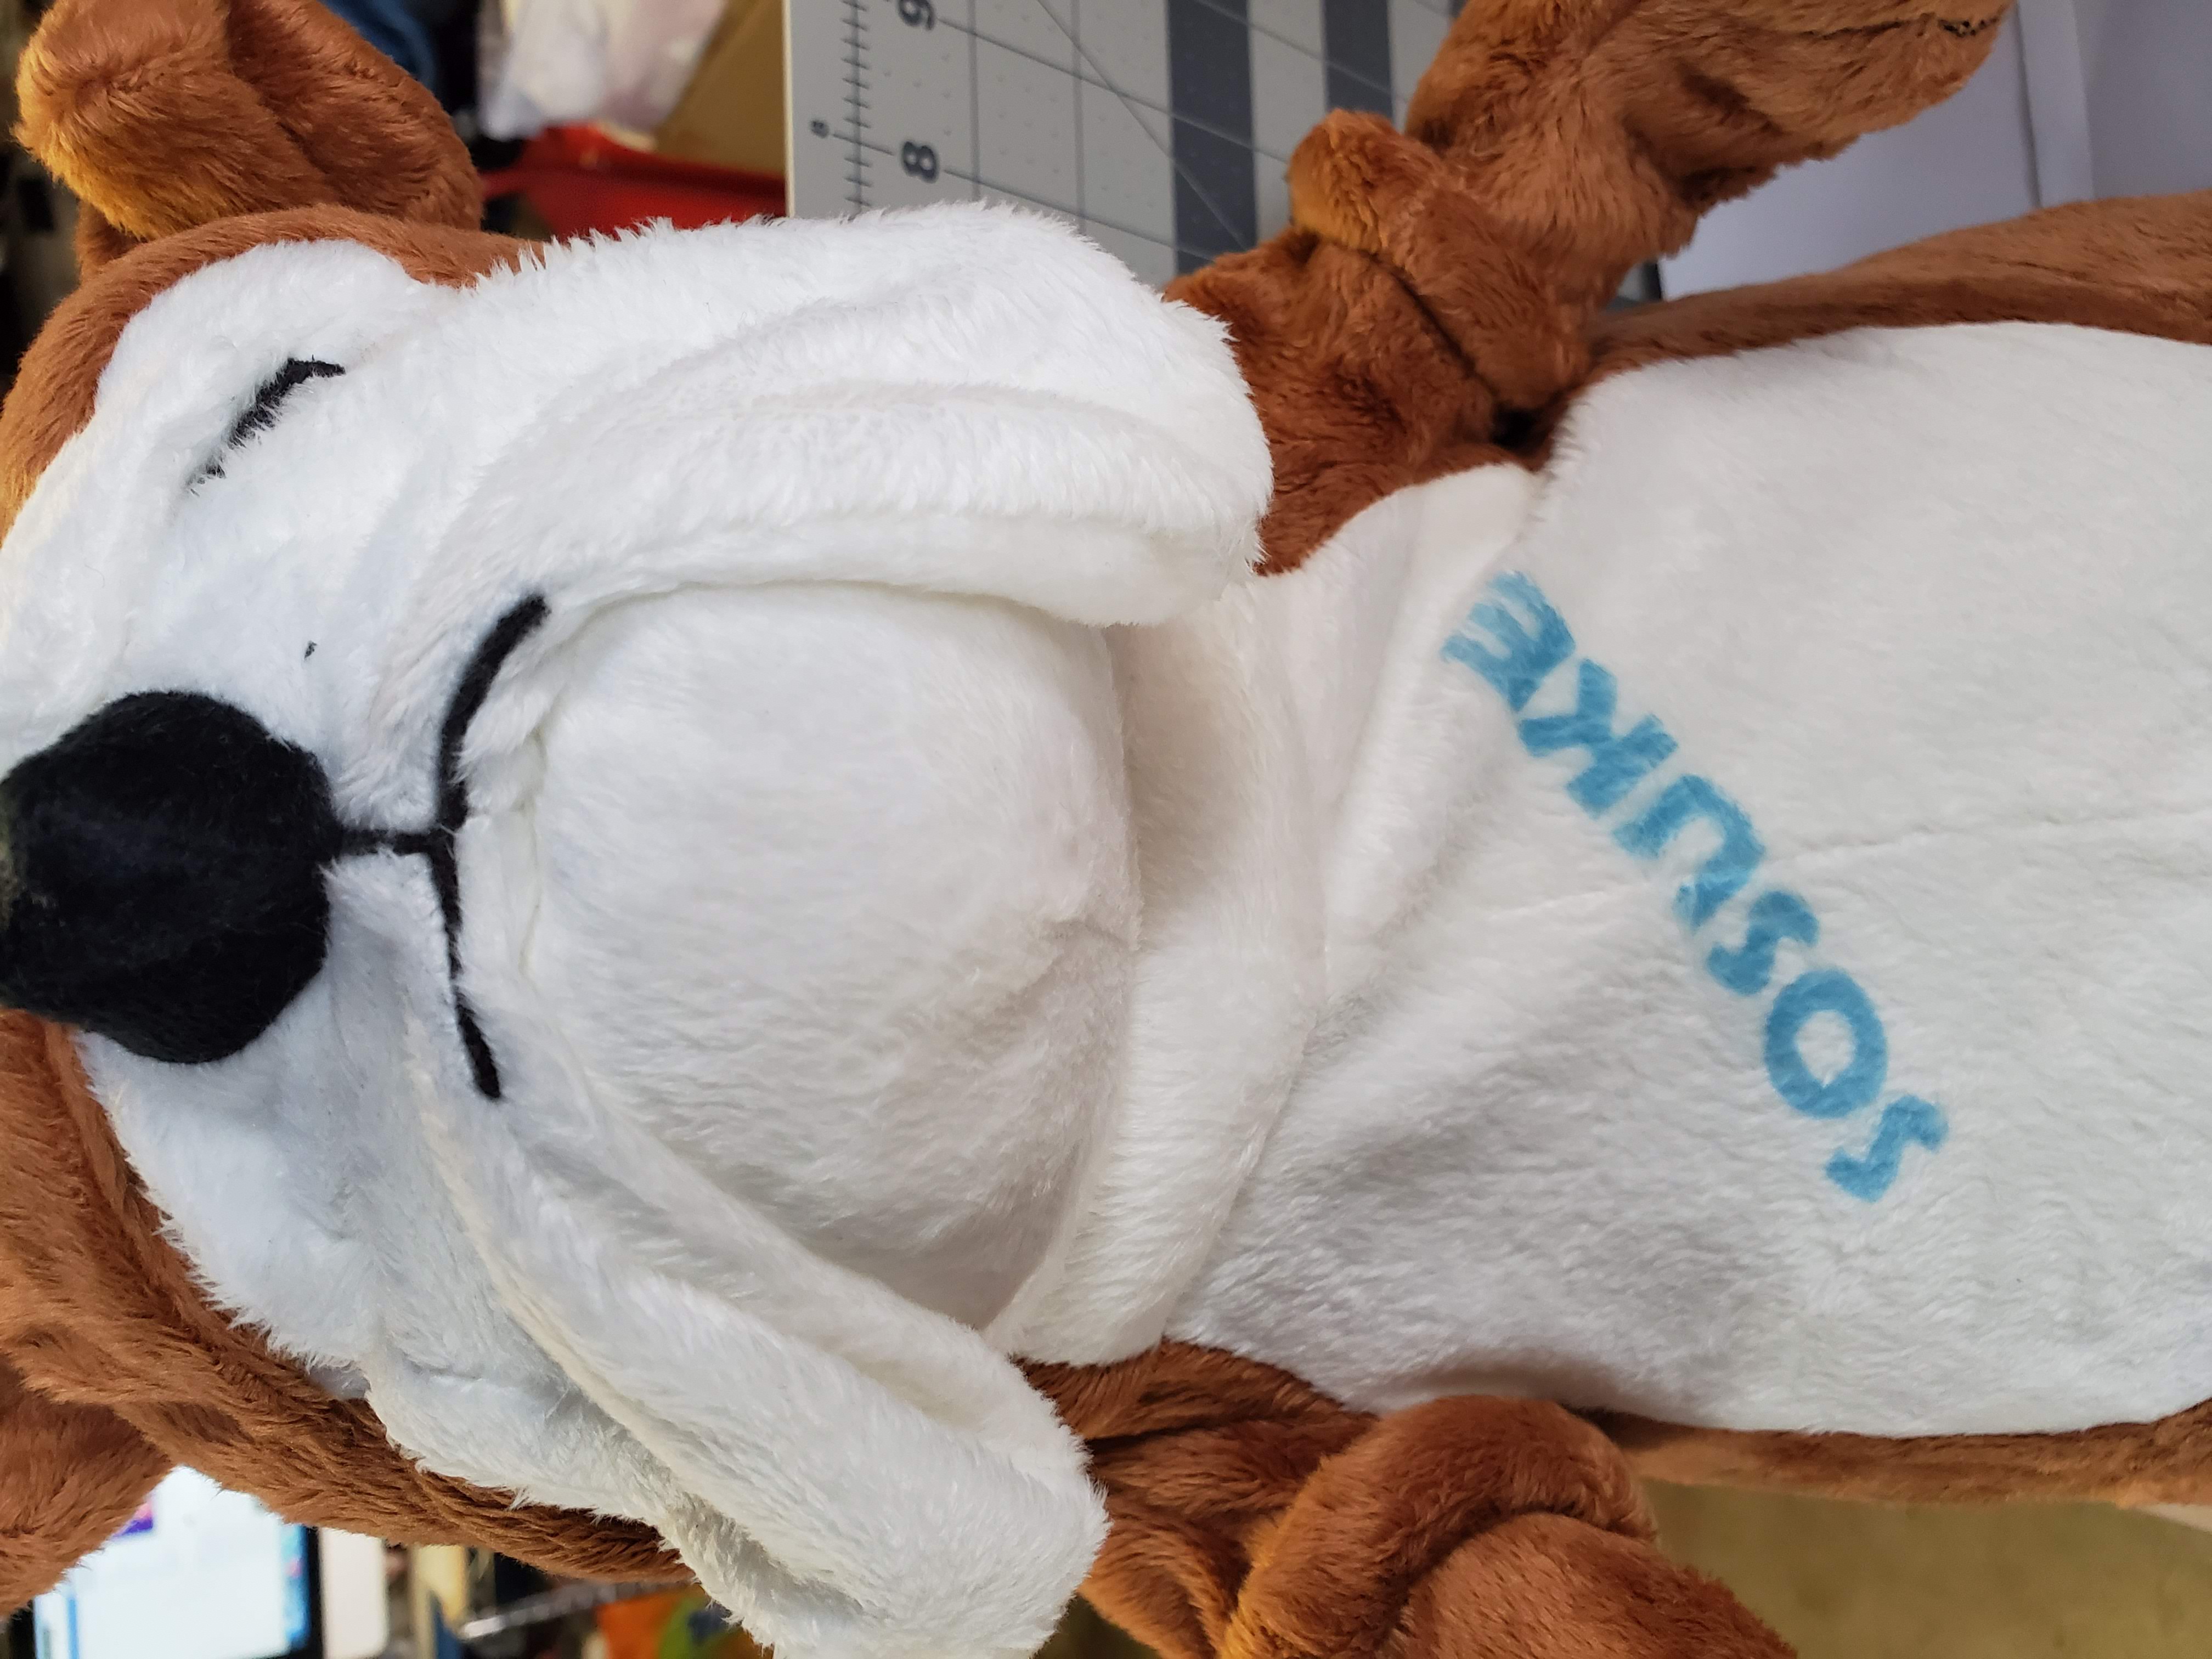 Sublimated name on stuffed animal made with sublimation printing